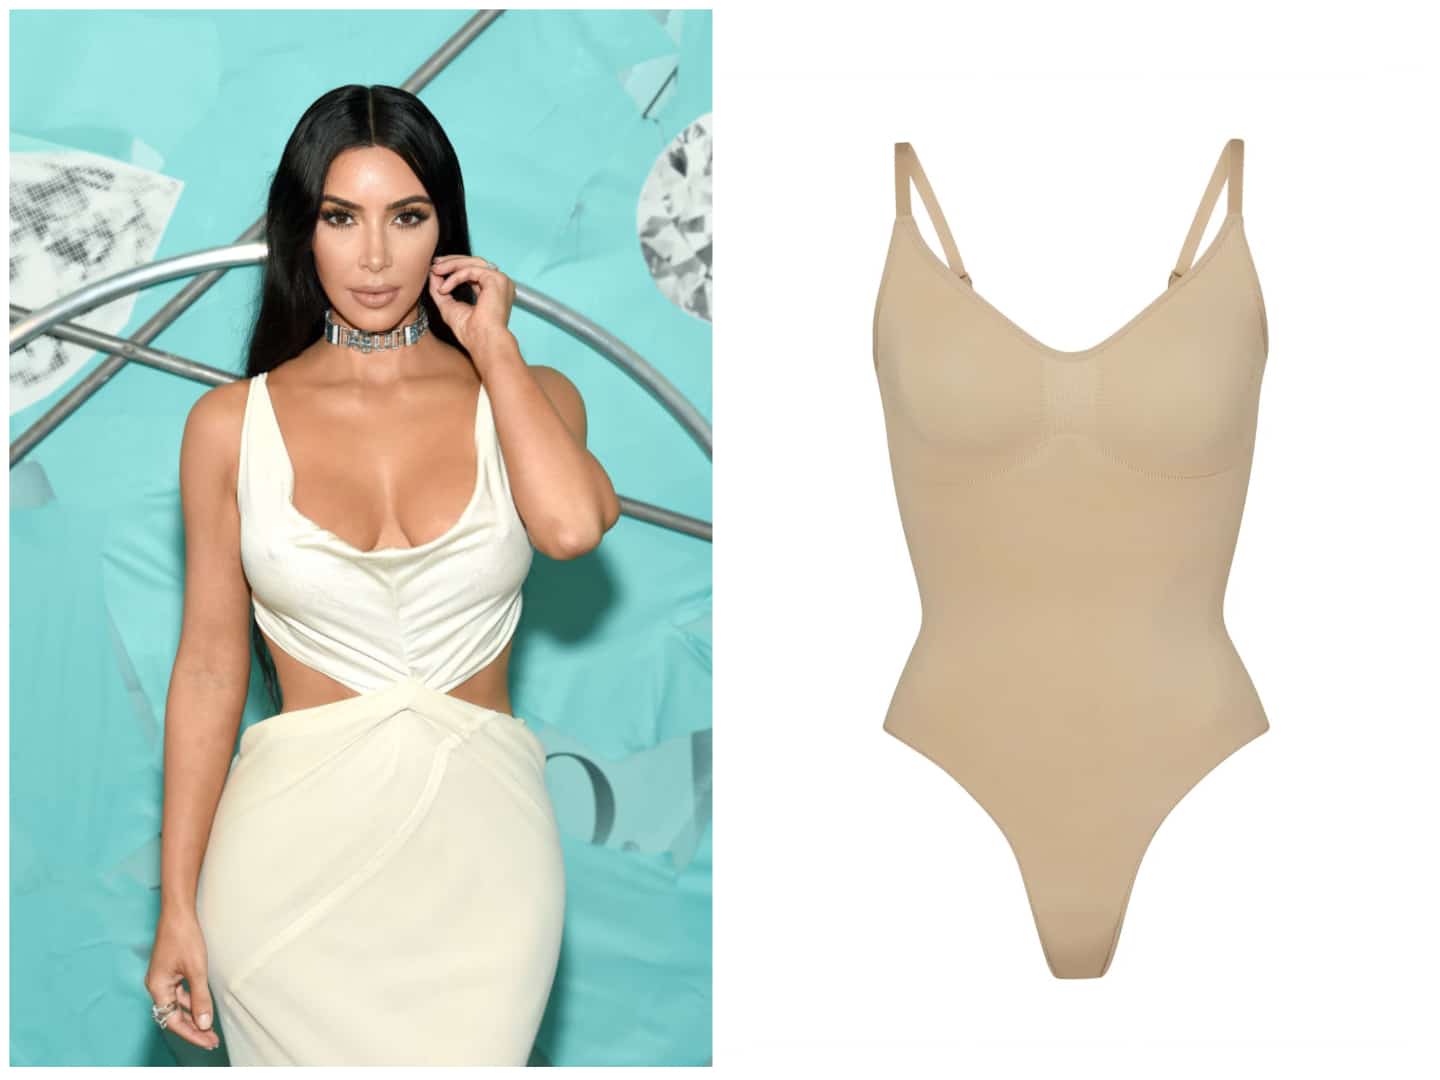 I tried the Skims bodysuit - it looked amazing but my vagina was